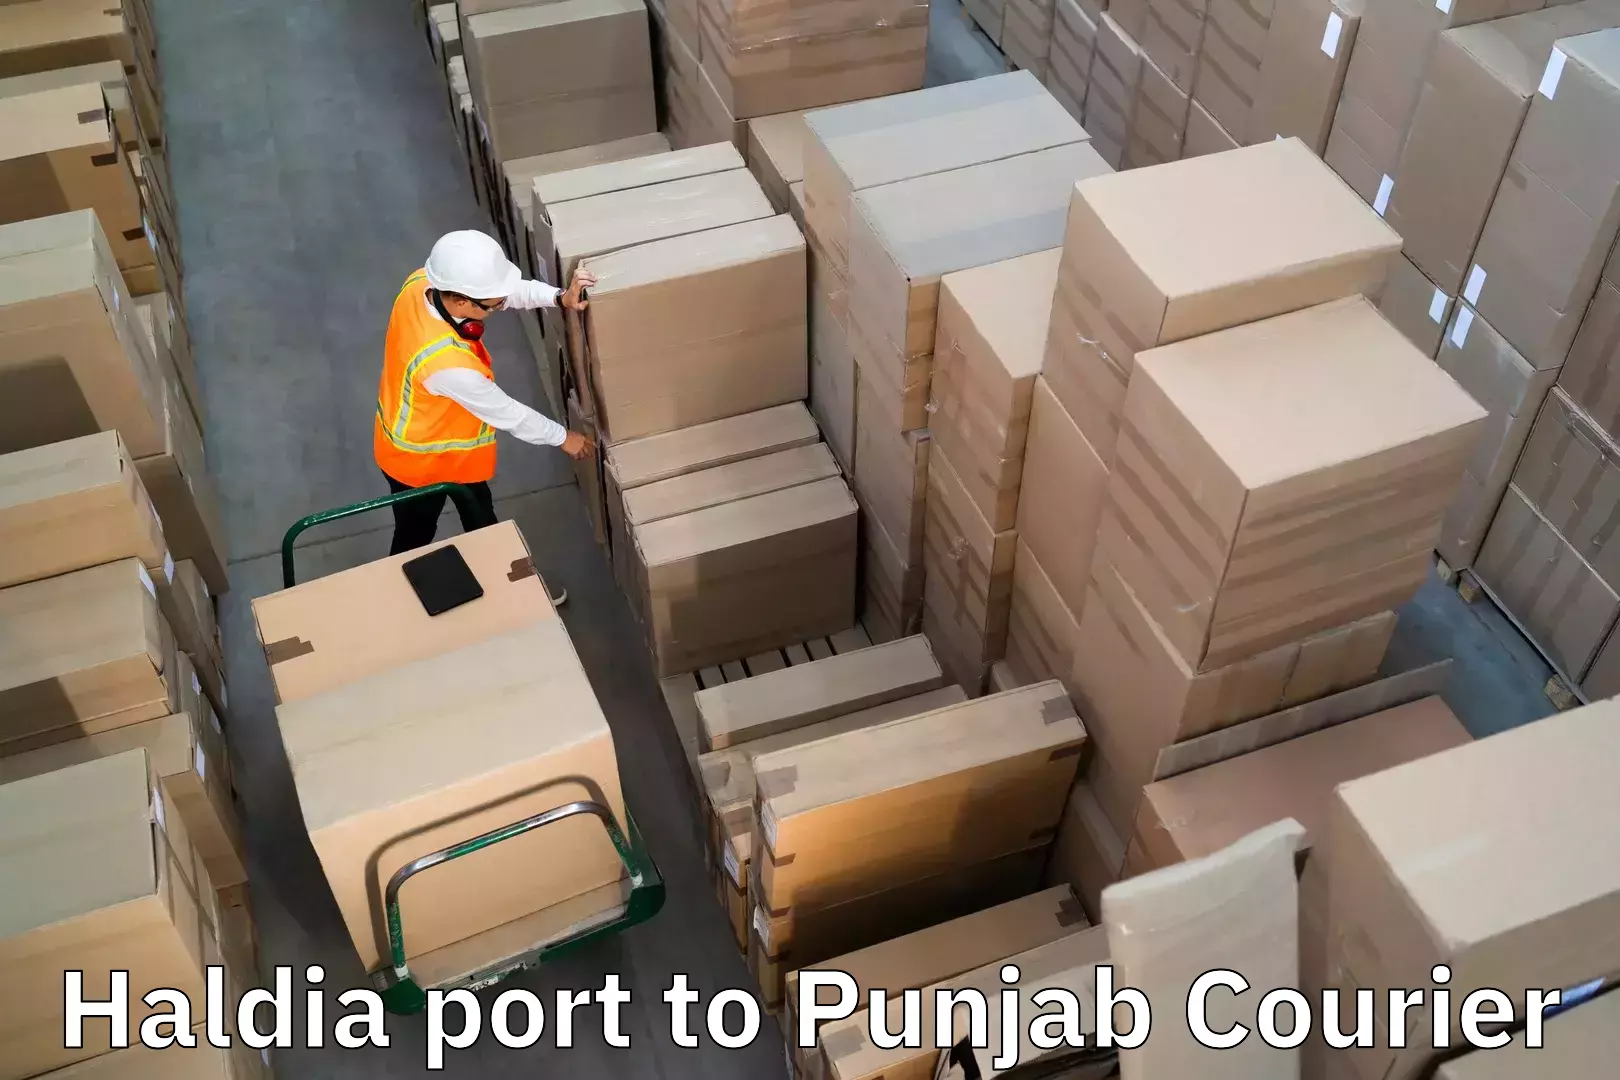 Nationwide luggage courier Haldia port to Pathankot